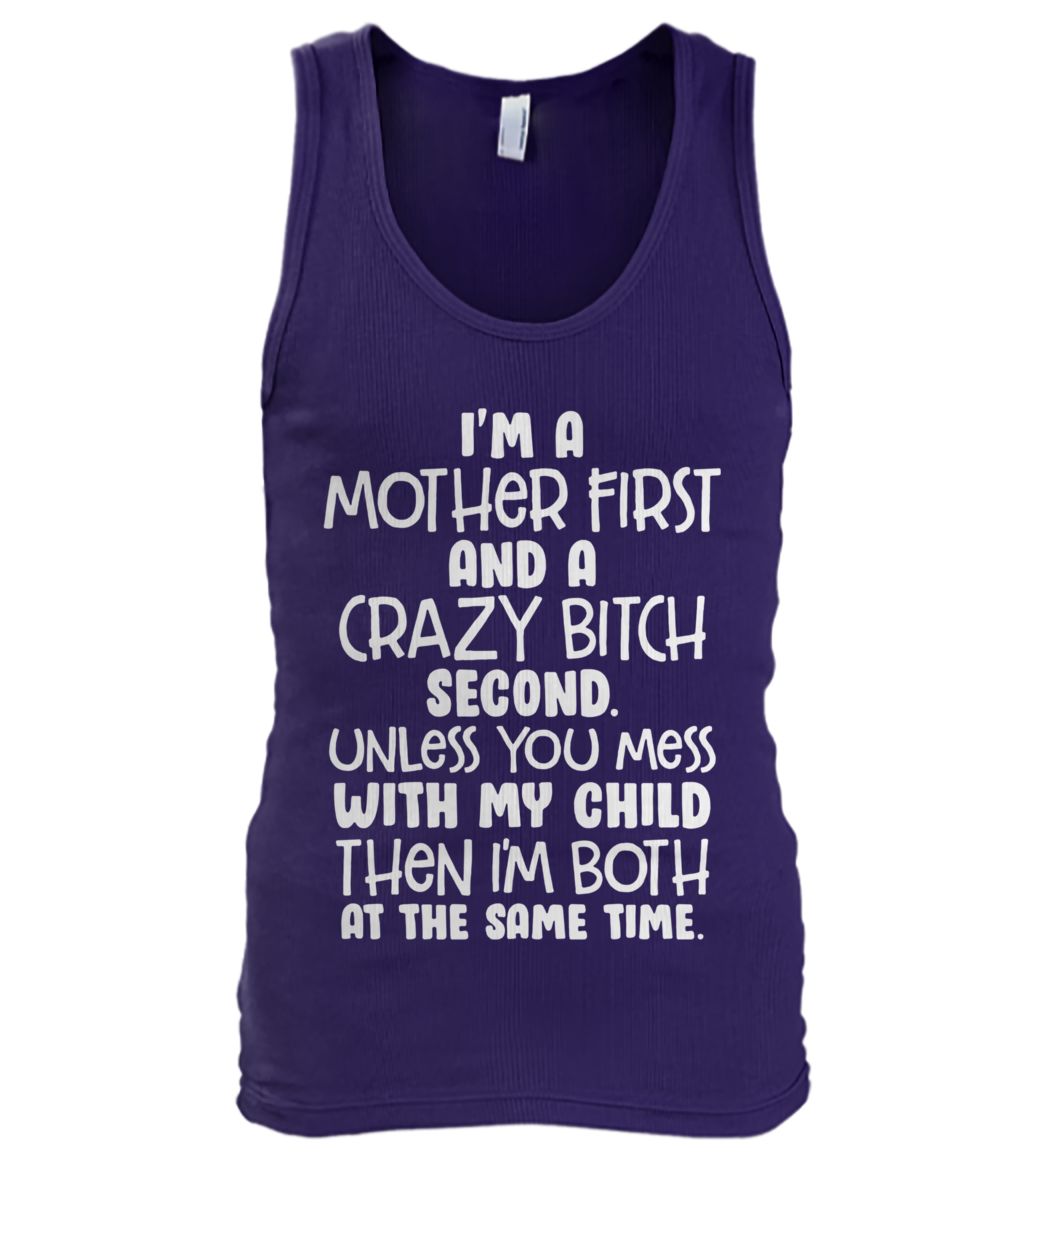 I’m a mother first and a crazy bitch second unless you mess with my child men's tank top